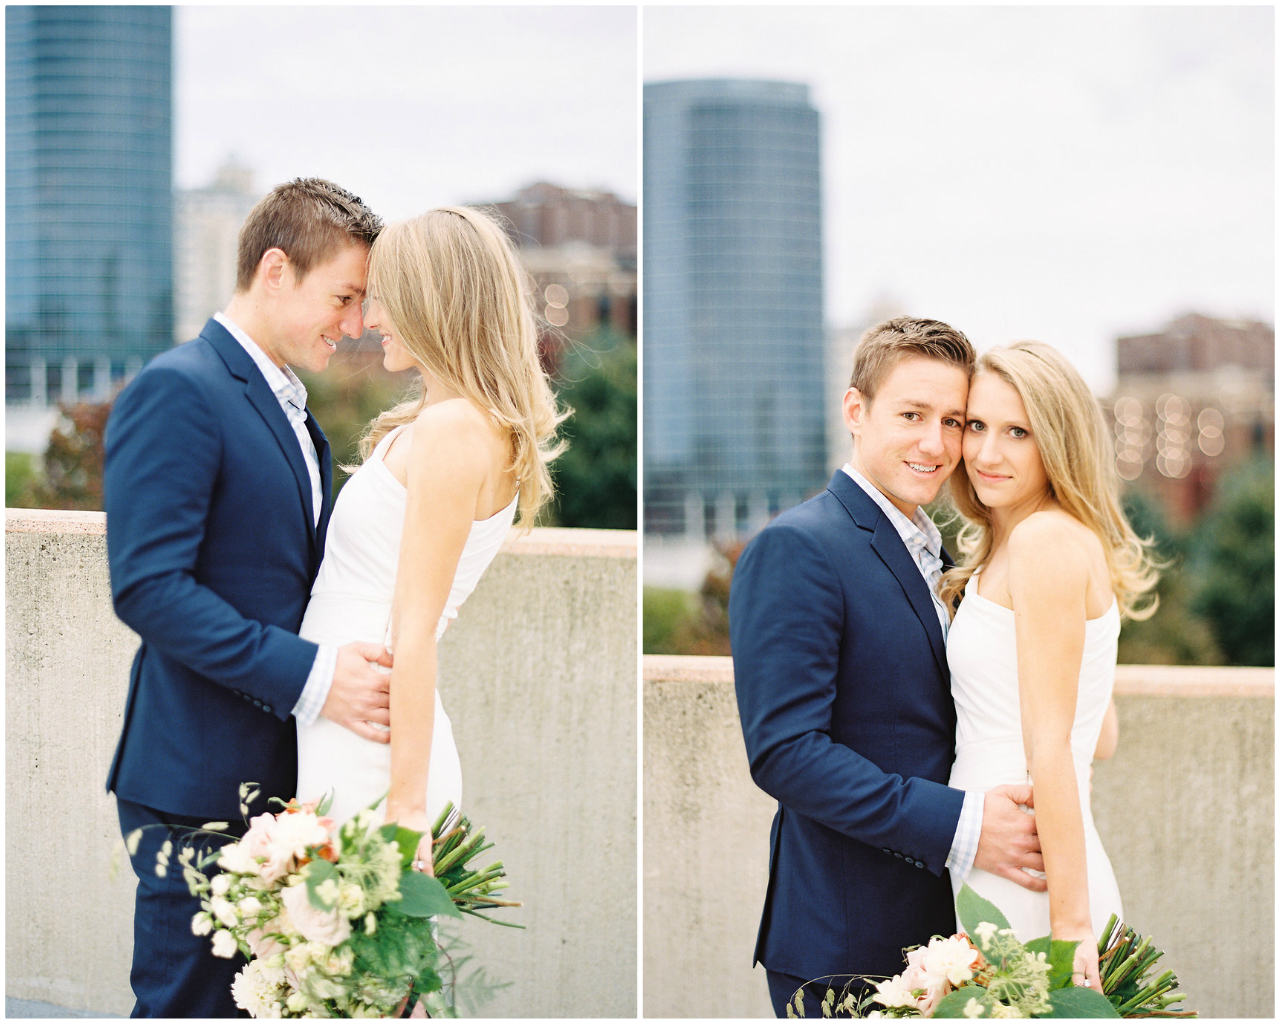 Downtown Grand Rapids Engagment Session | The Day's Design | Ashley Slater Photography